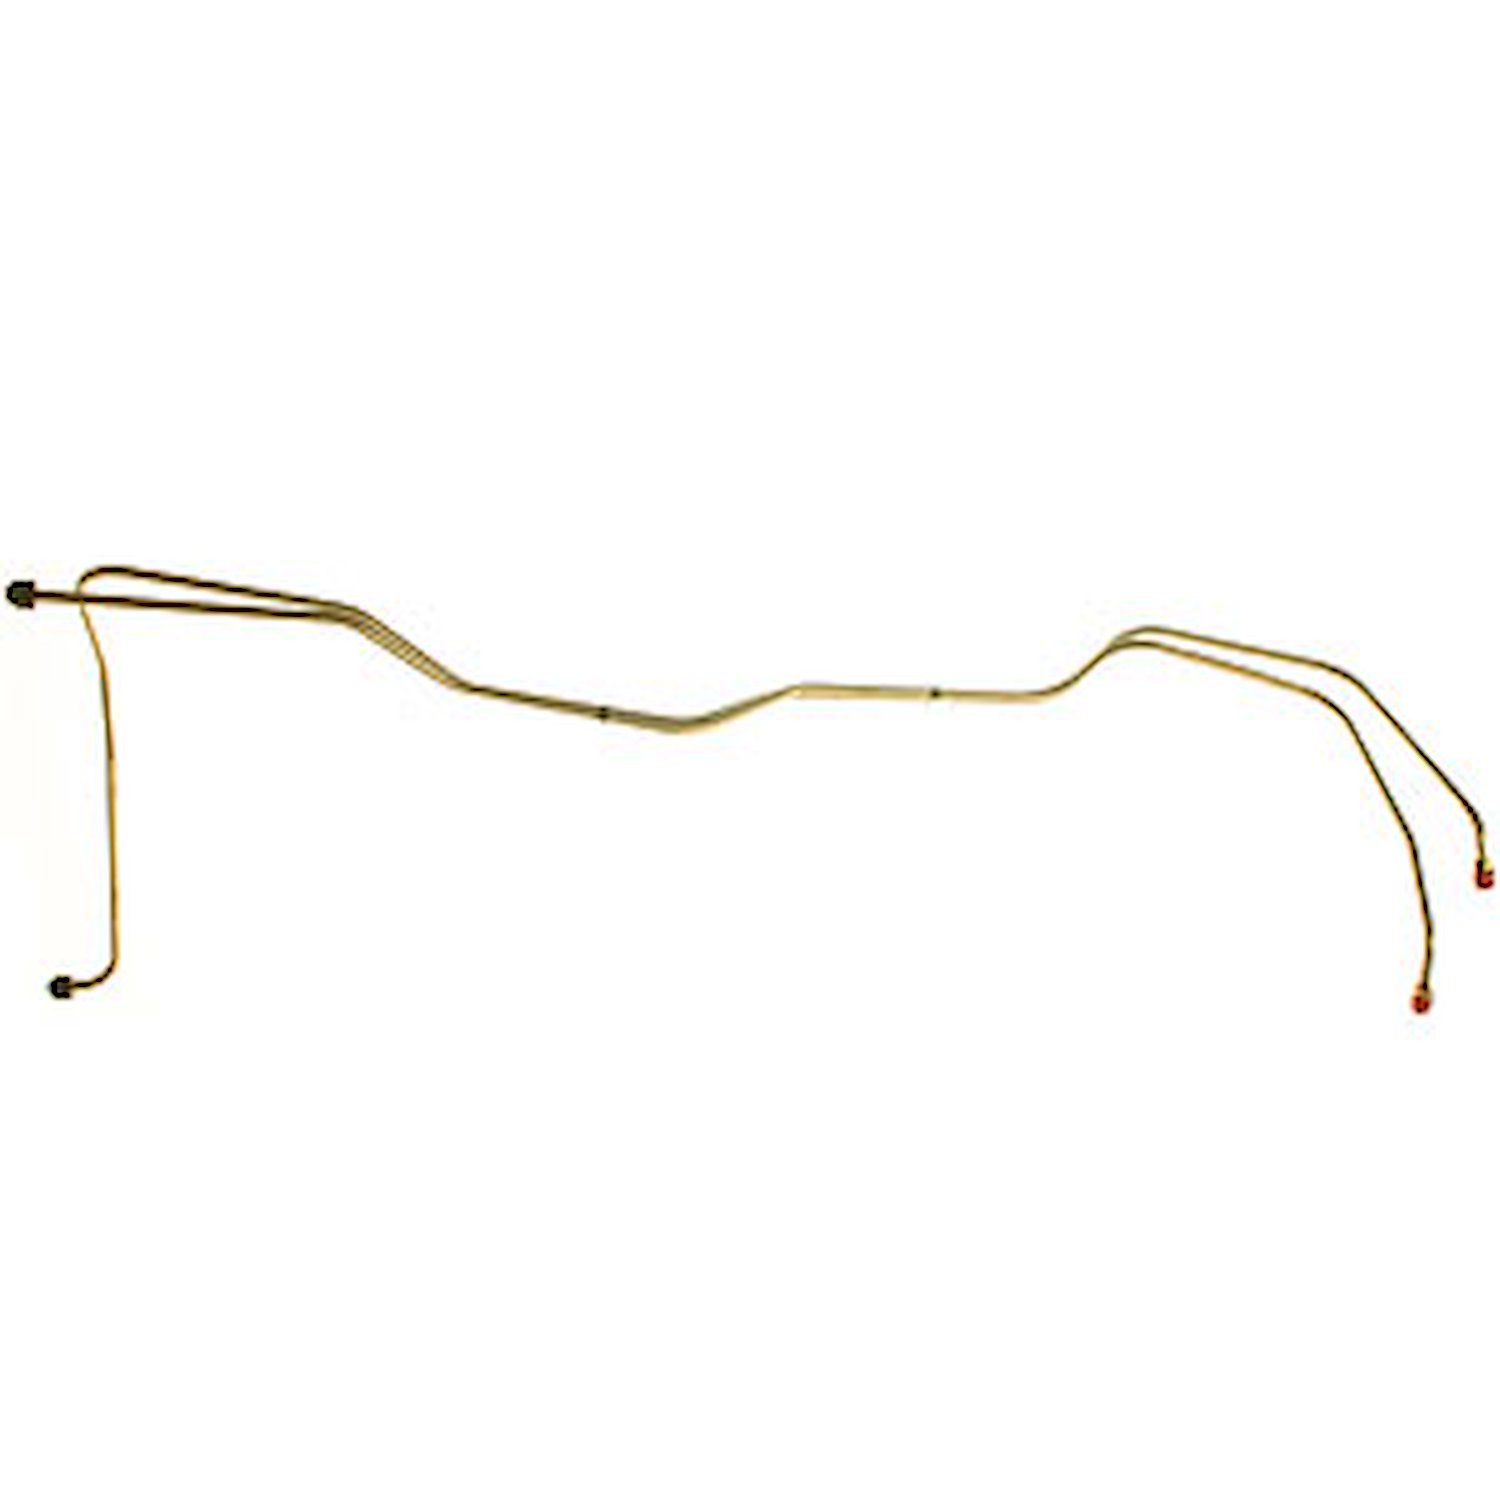 Stainless Steel Transmission Cooler Lines 1955-57 Chevy Bel Air, Biscayne, Impala, Nomad